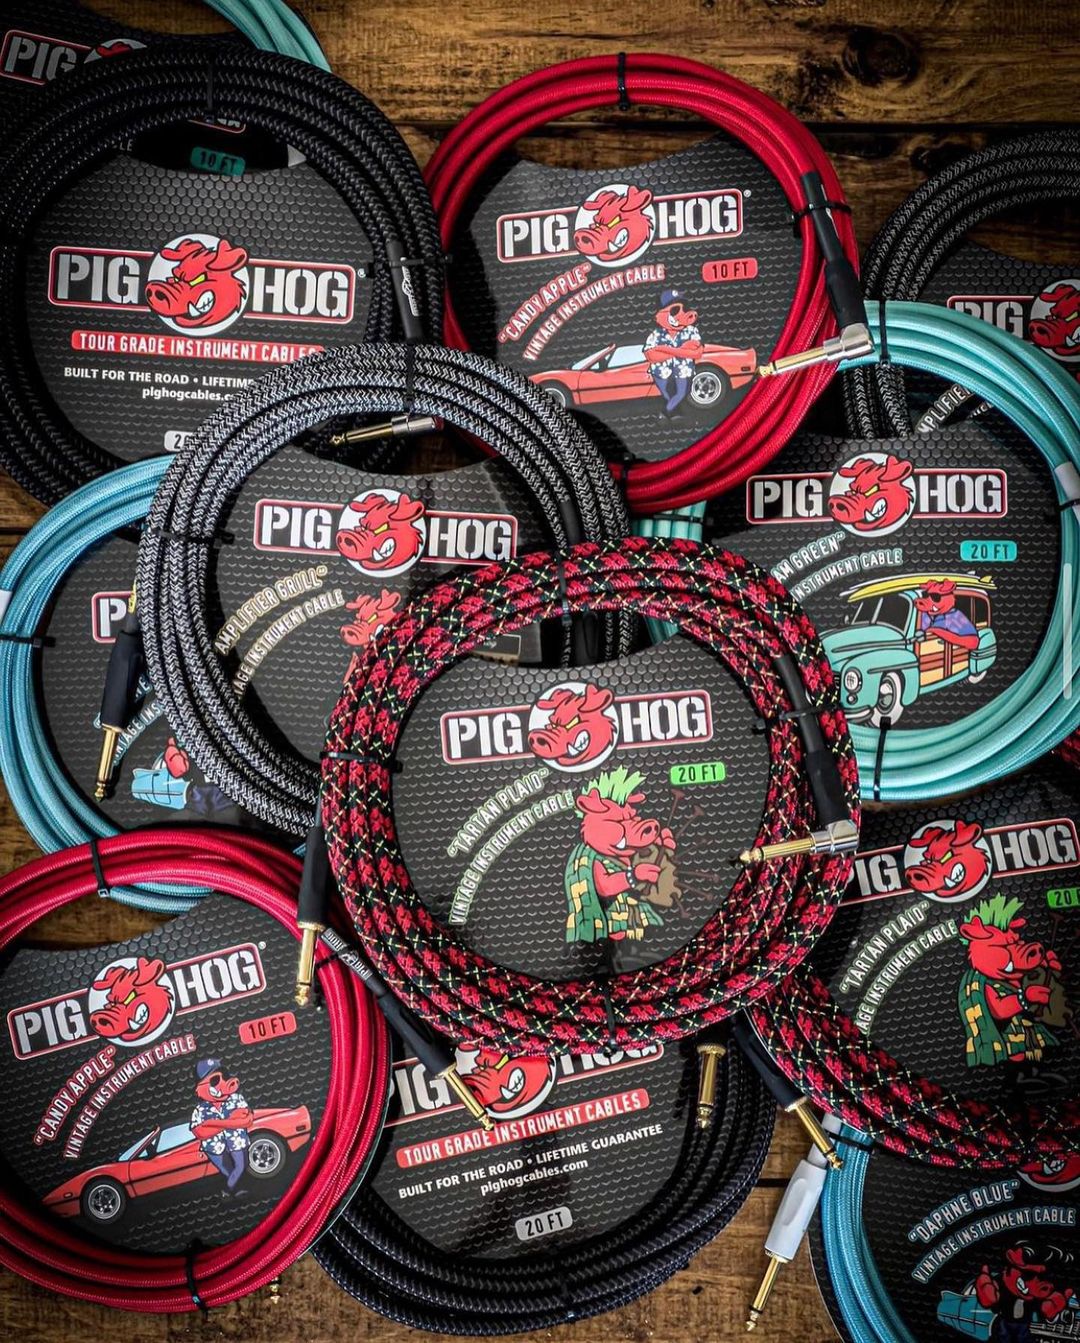 Pig Hog Cables Profesionales